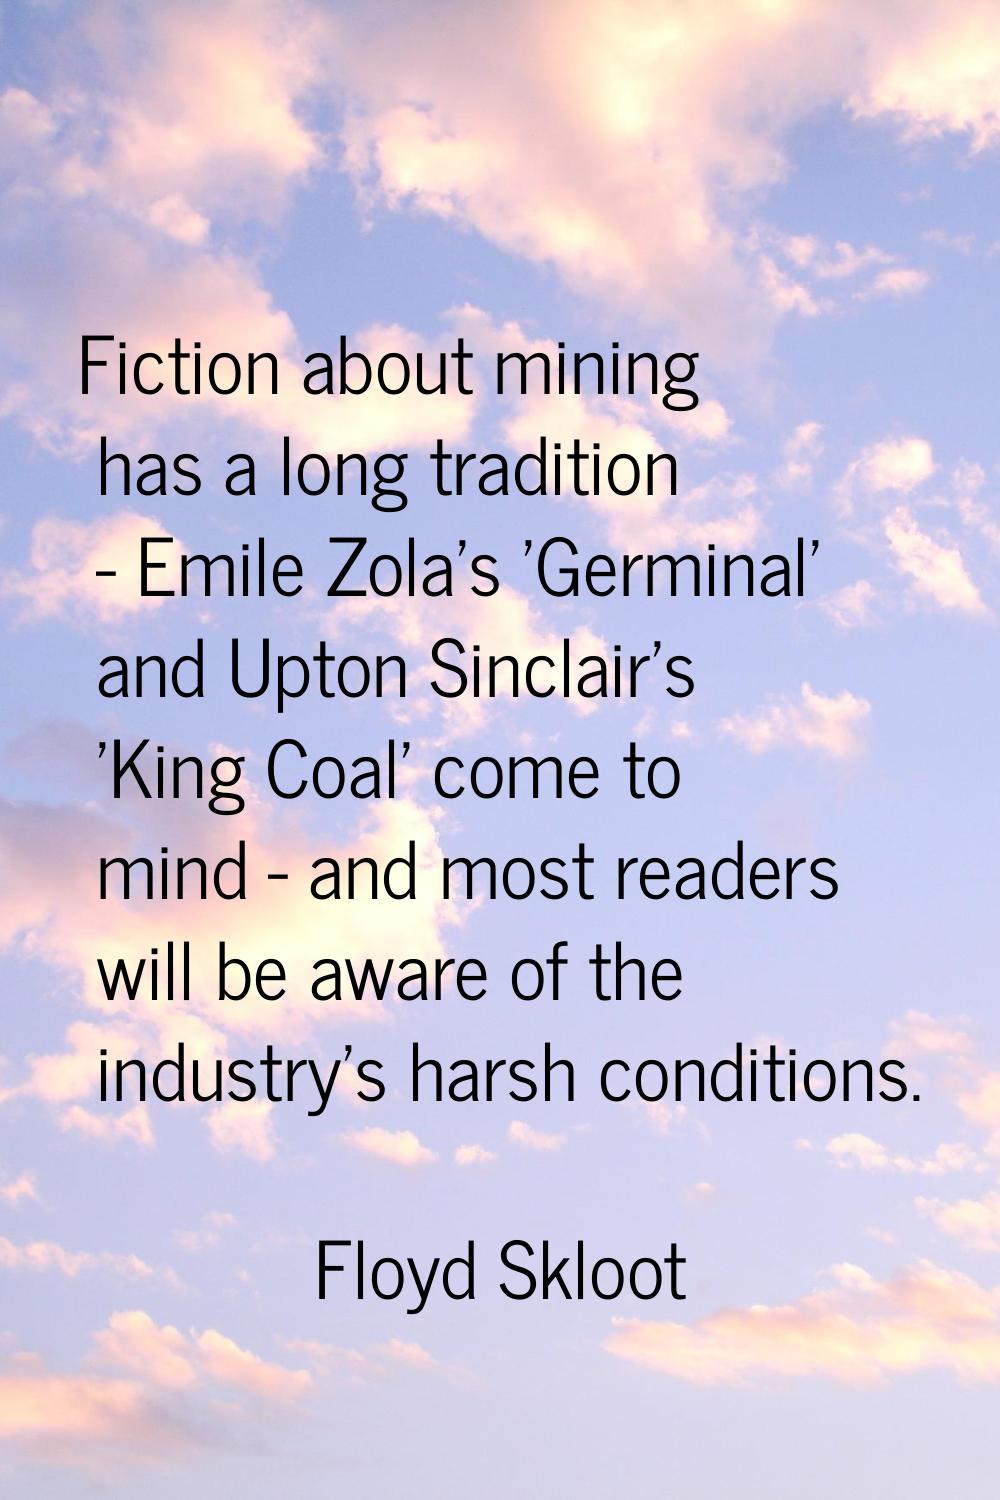 Fiction about mining has a long tradition - Emile Zola's 'Germinal' and Upton Sinclair's 'King Coal